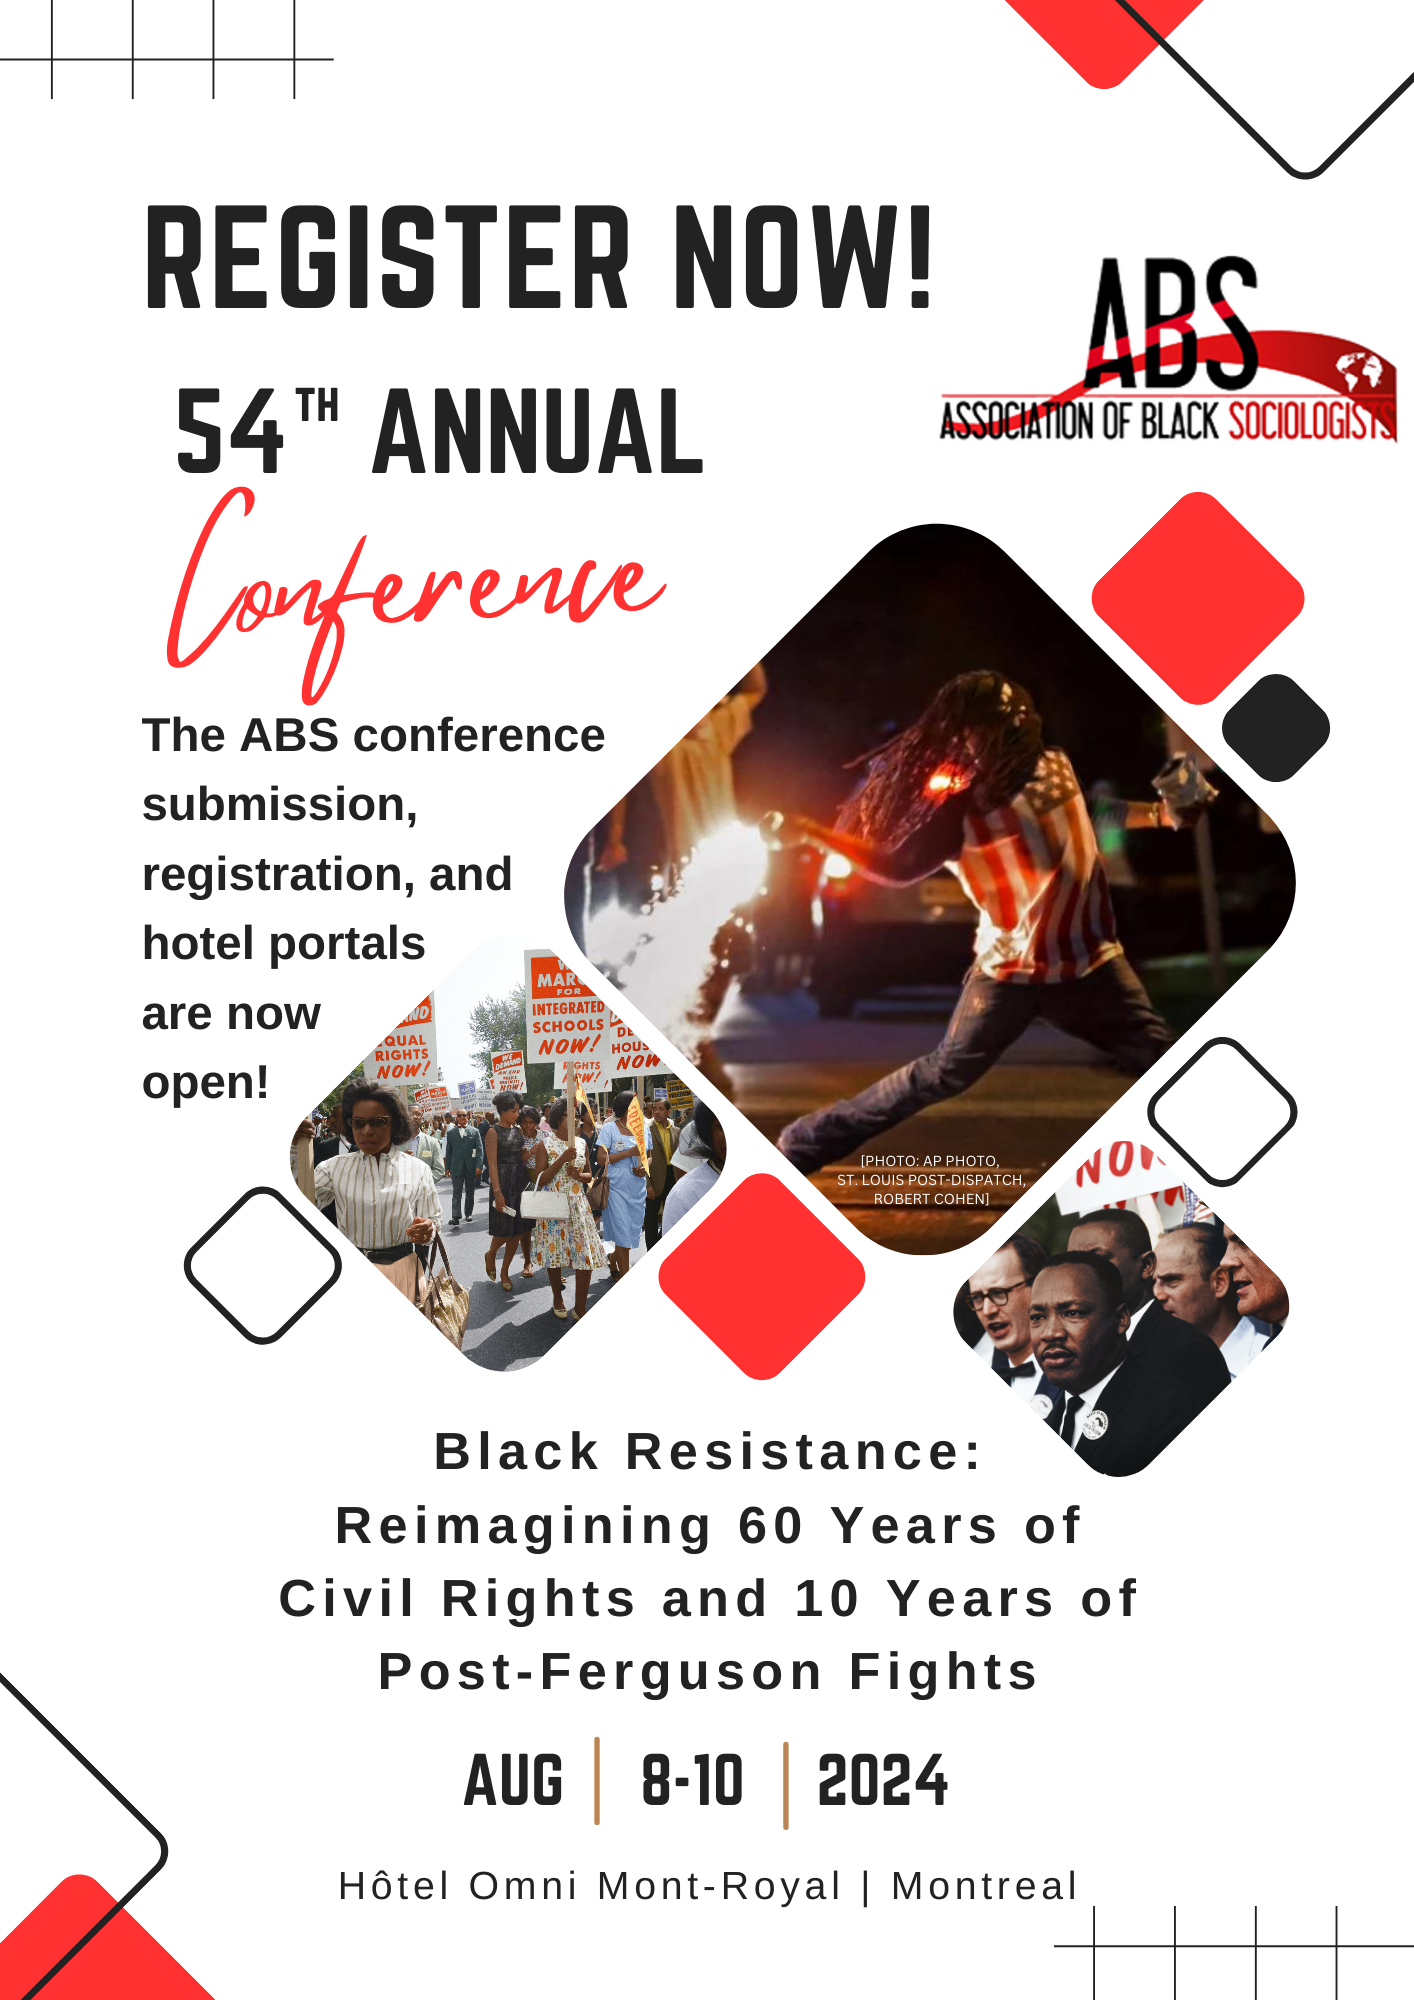 Register now for the 54th annual ABS conference